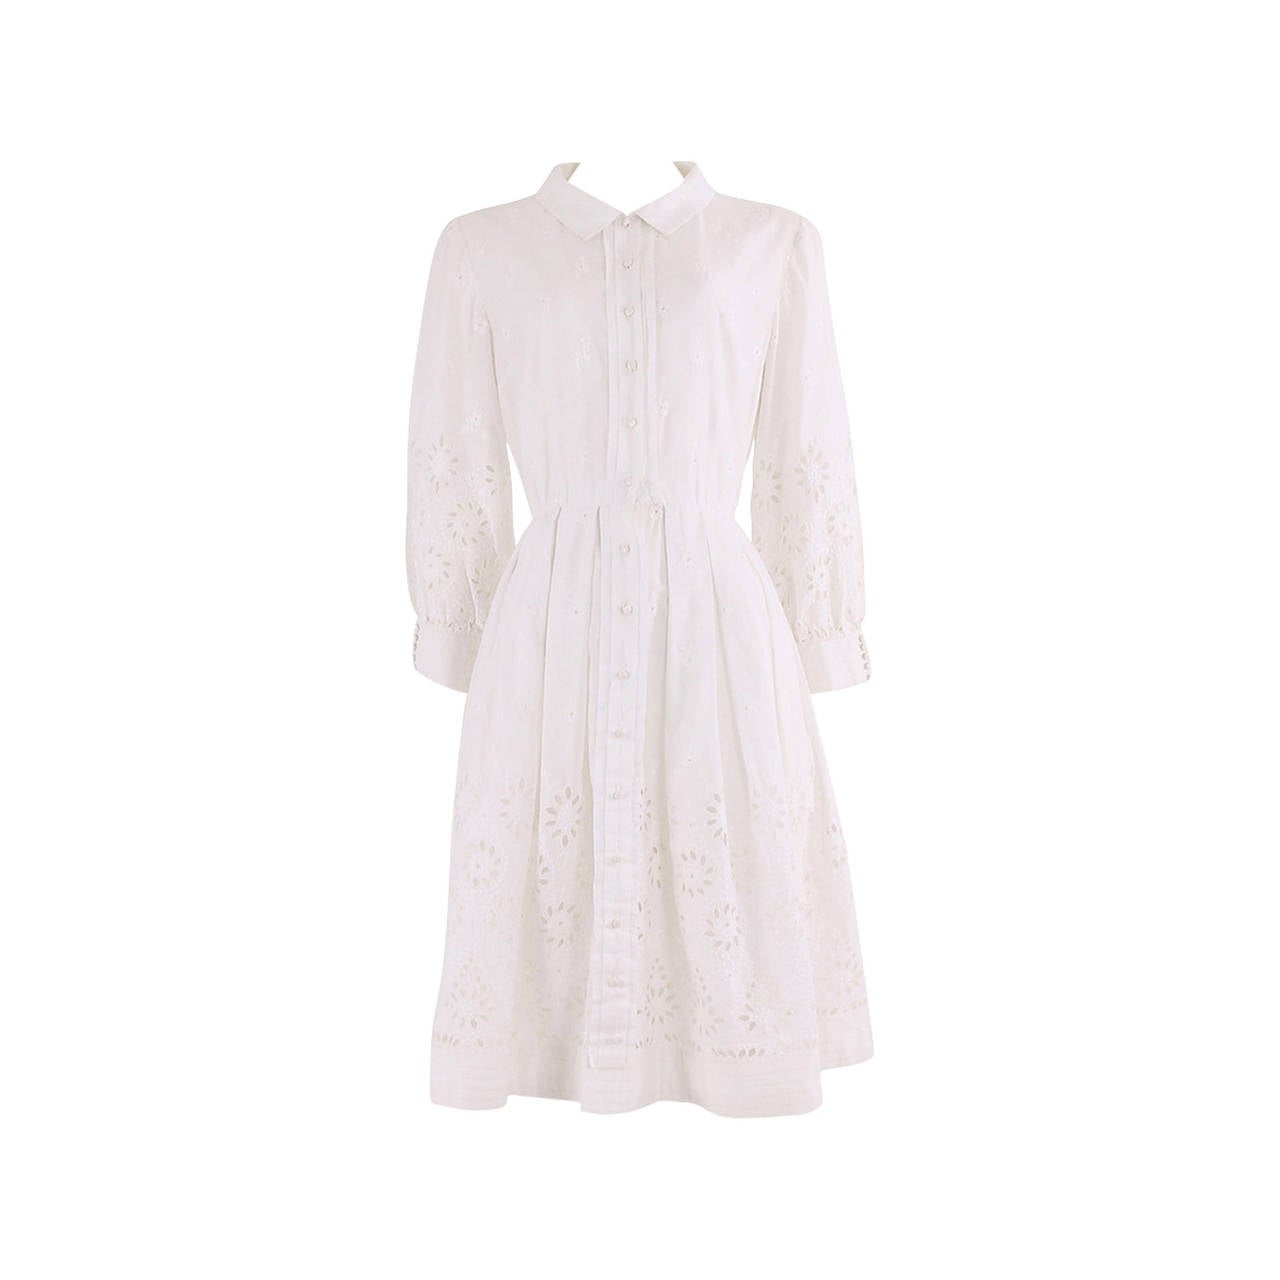 1950's White Cotton Broderie Anglaise Summer Dress